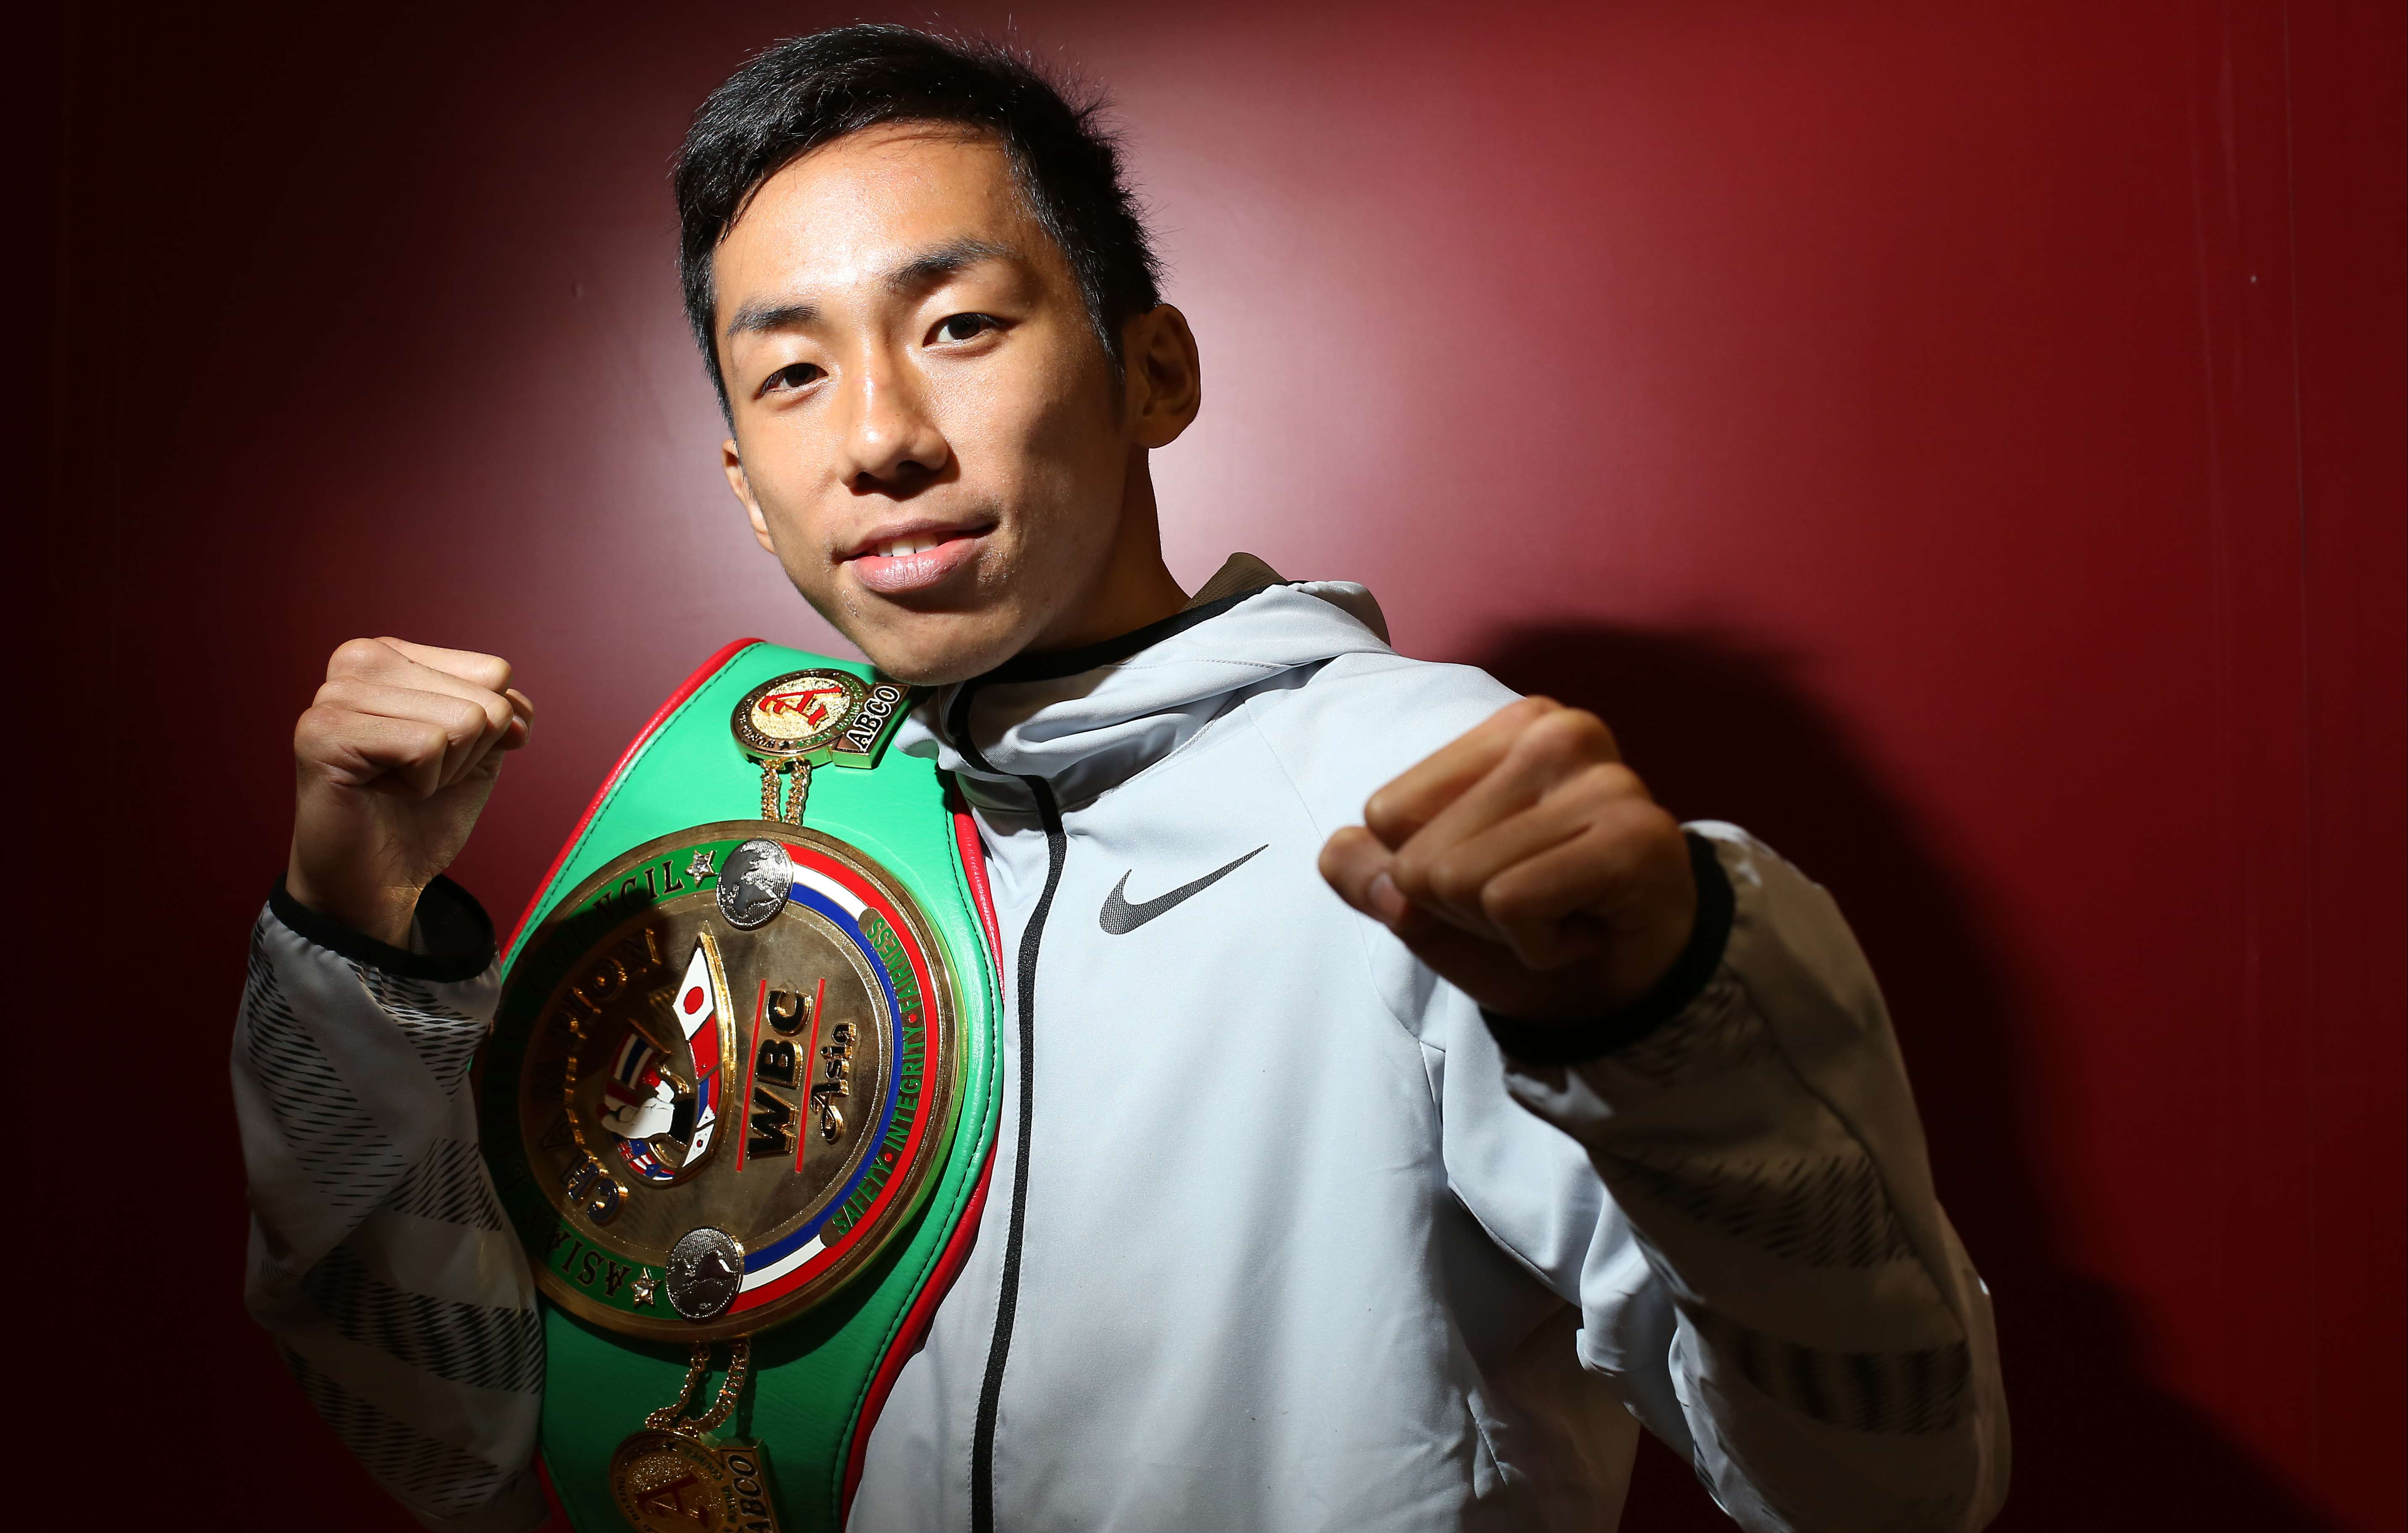 Undefeated boxer Rex Tso is held up as a role mode for young Hongkongers. Photo: Nora Tam